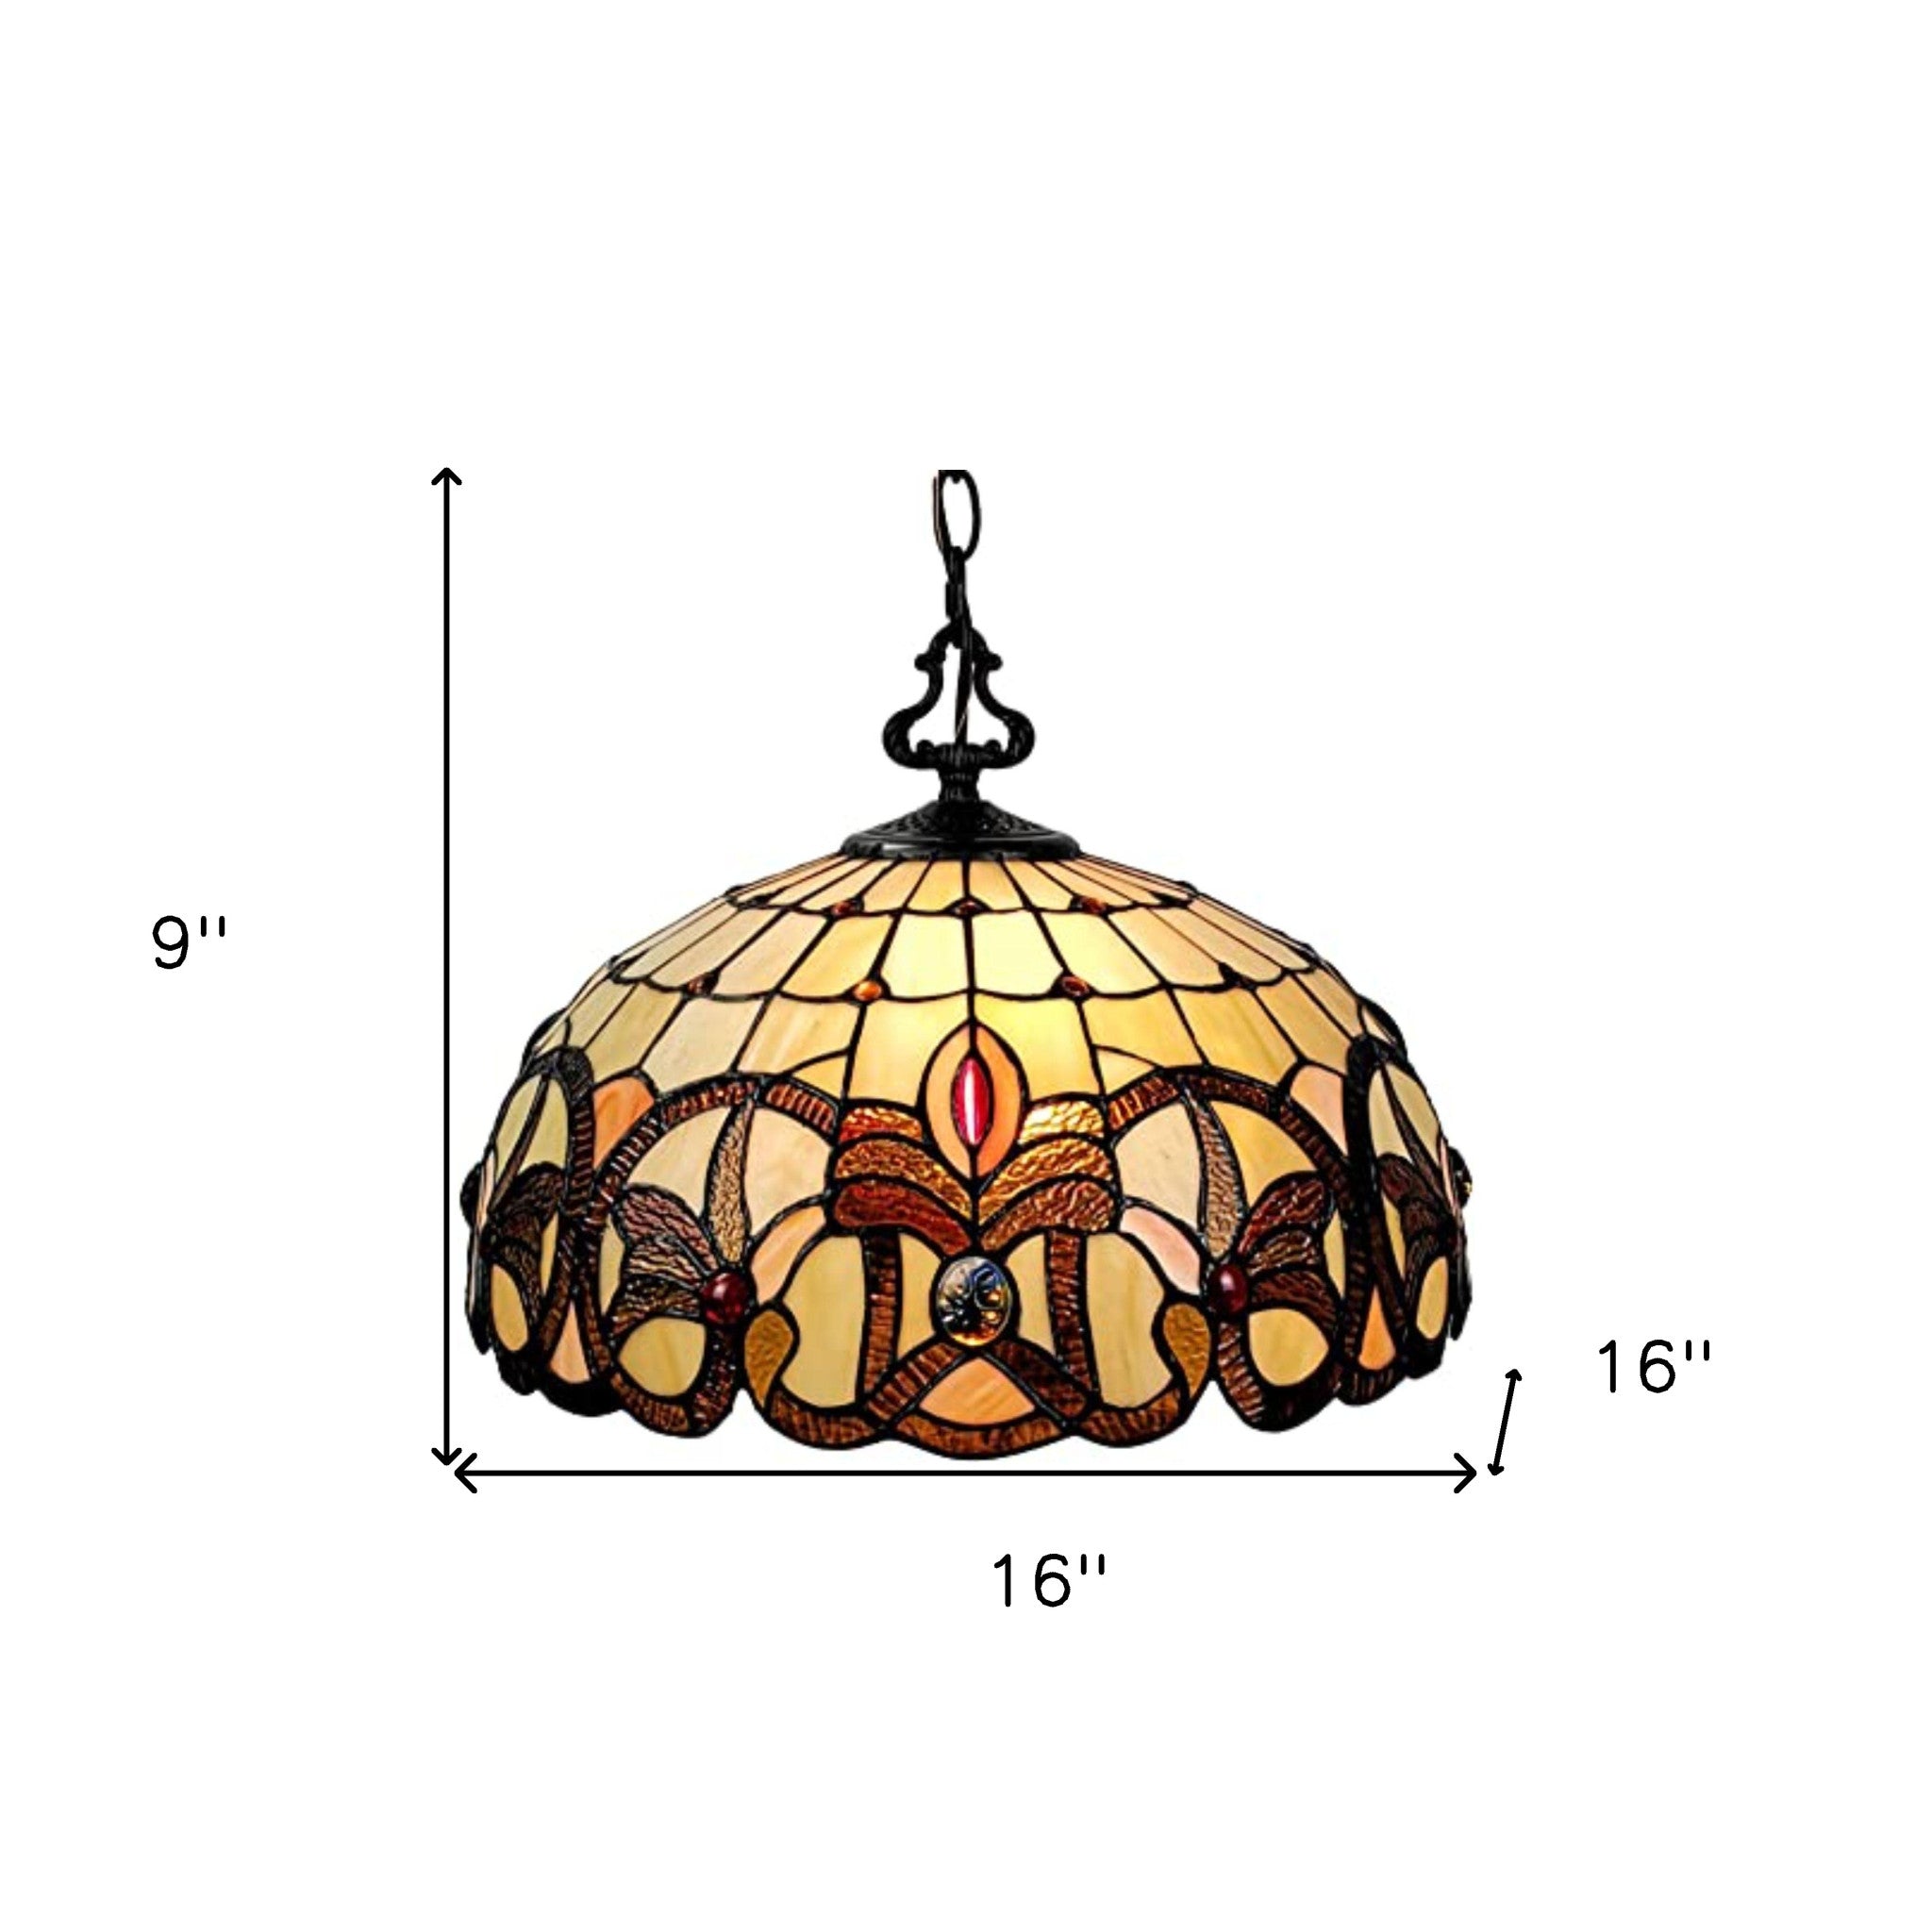 16" Tiffany Style Stained Glass Two Light Glass Dimmable Ceiling Light